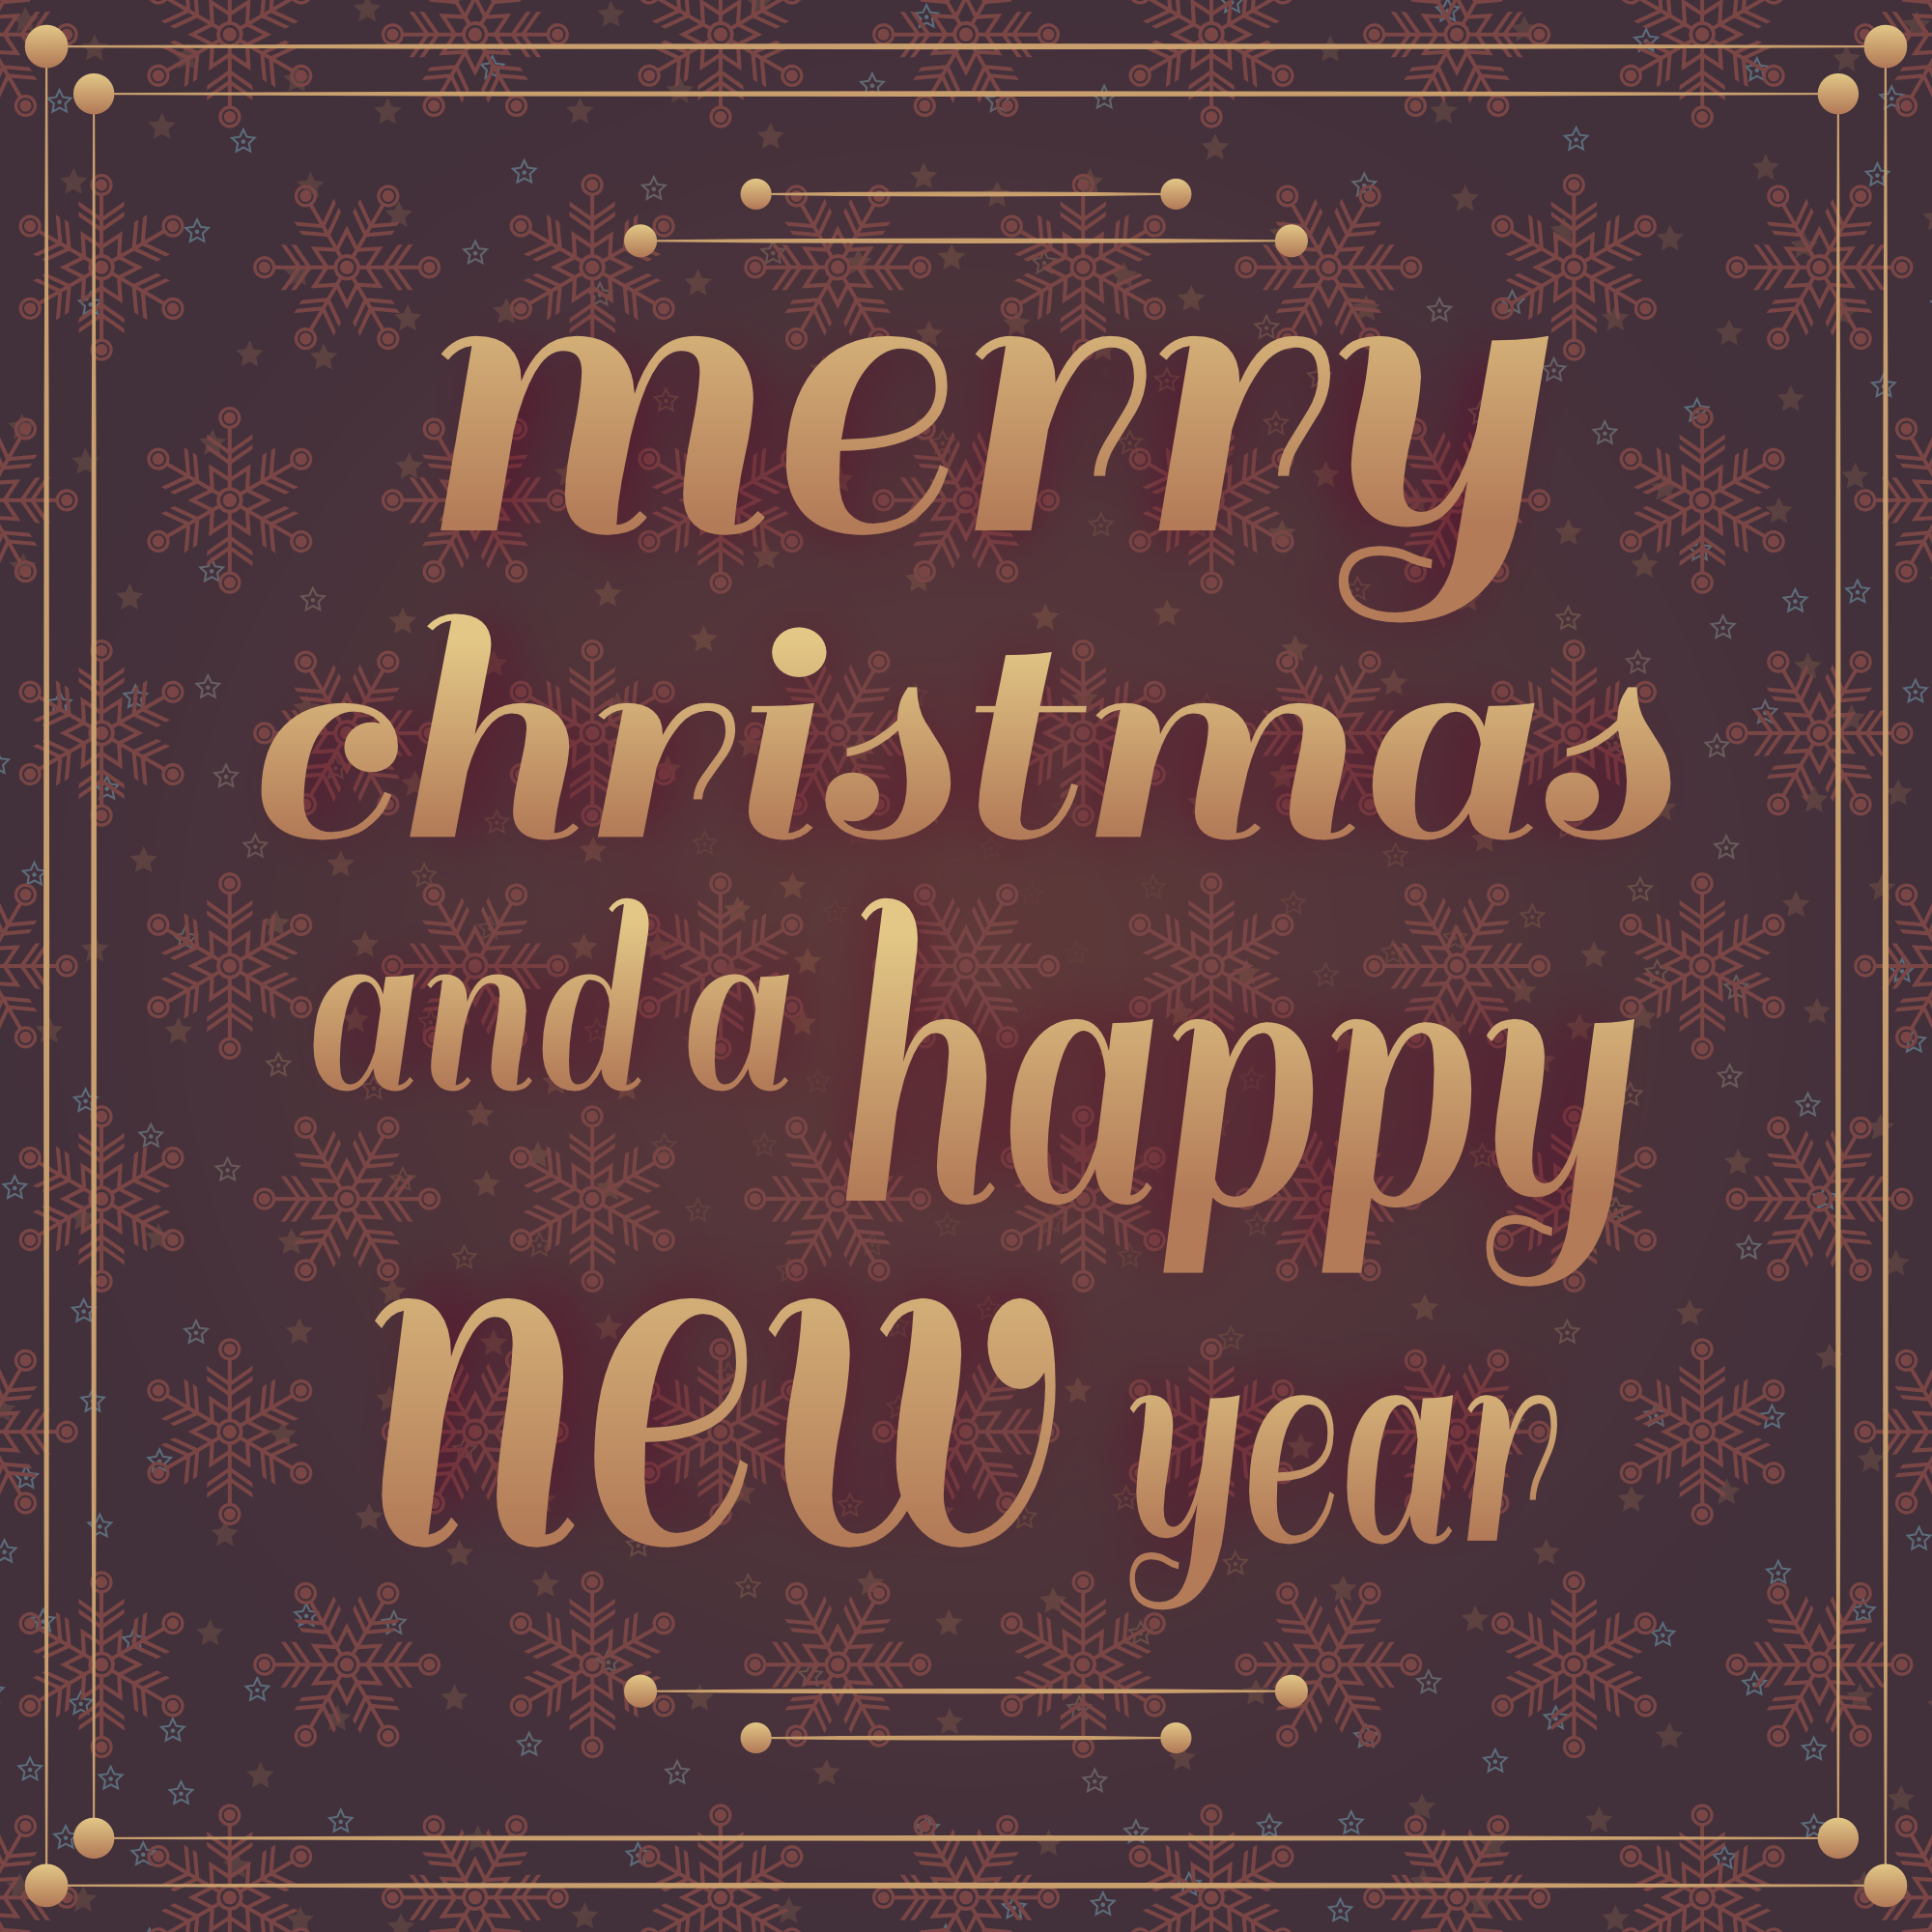 File:Merry Christmas and Happy New Year 2.png - Wikipedia